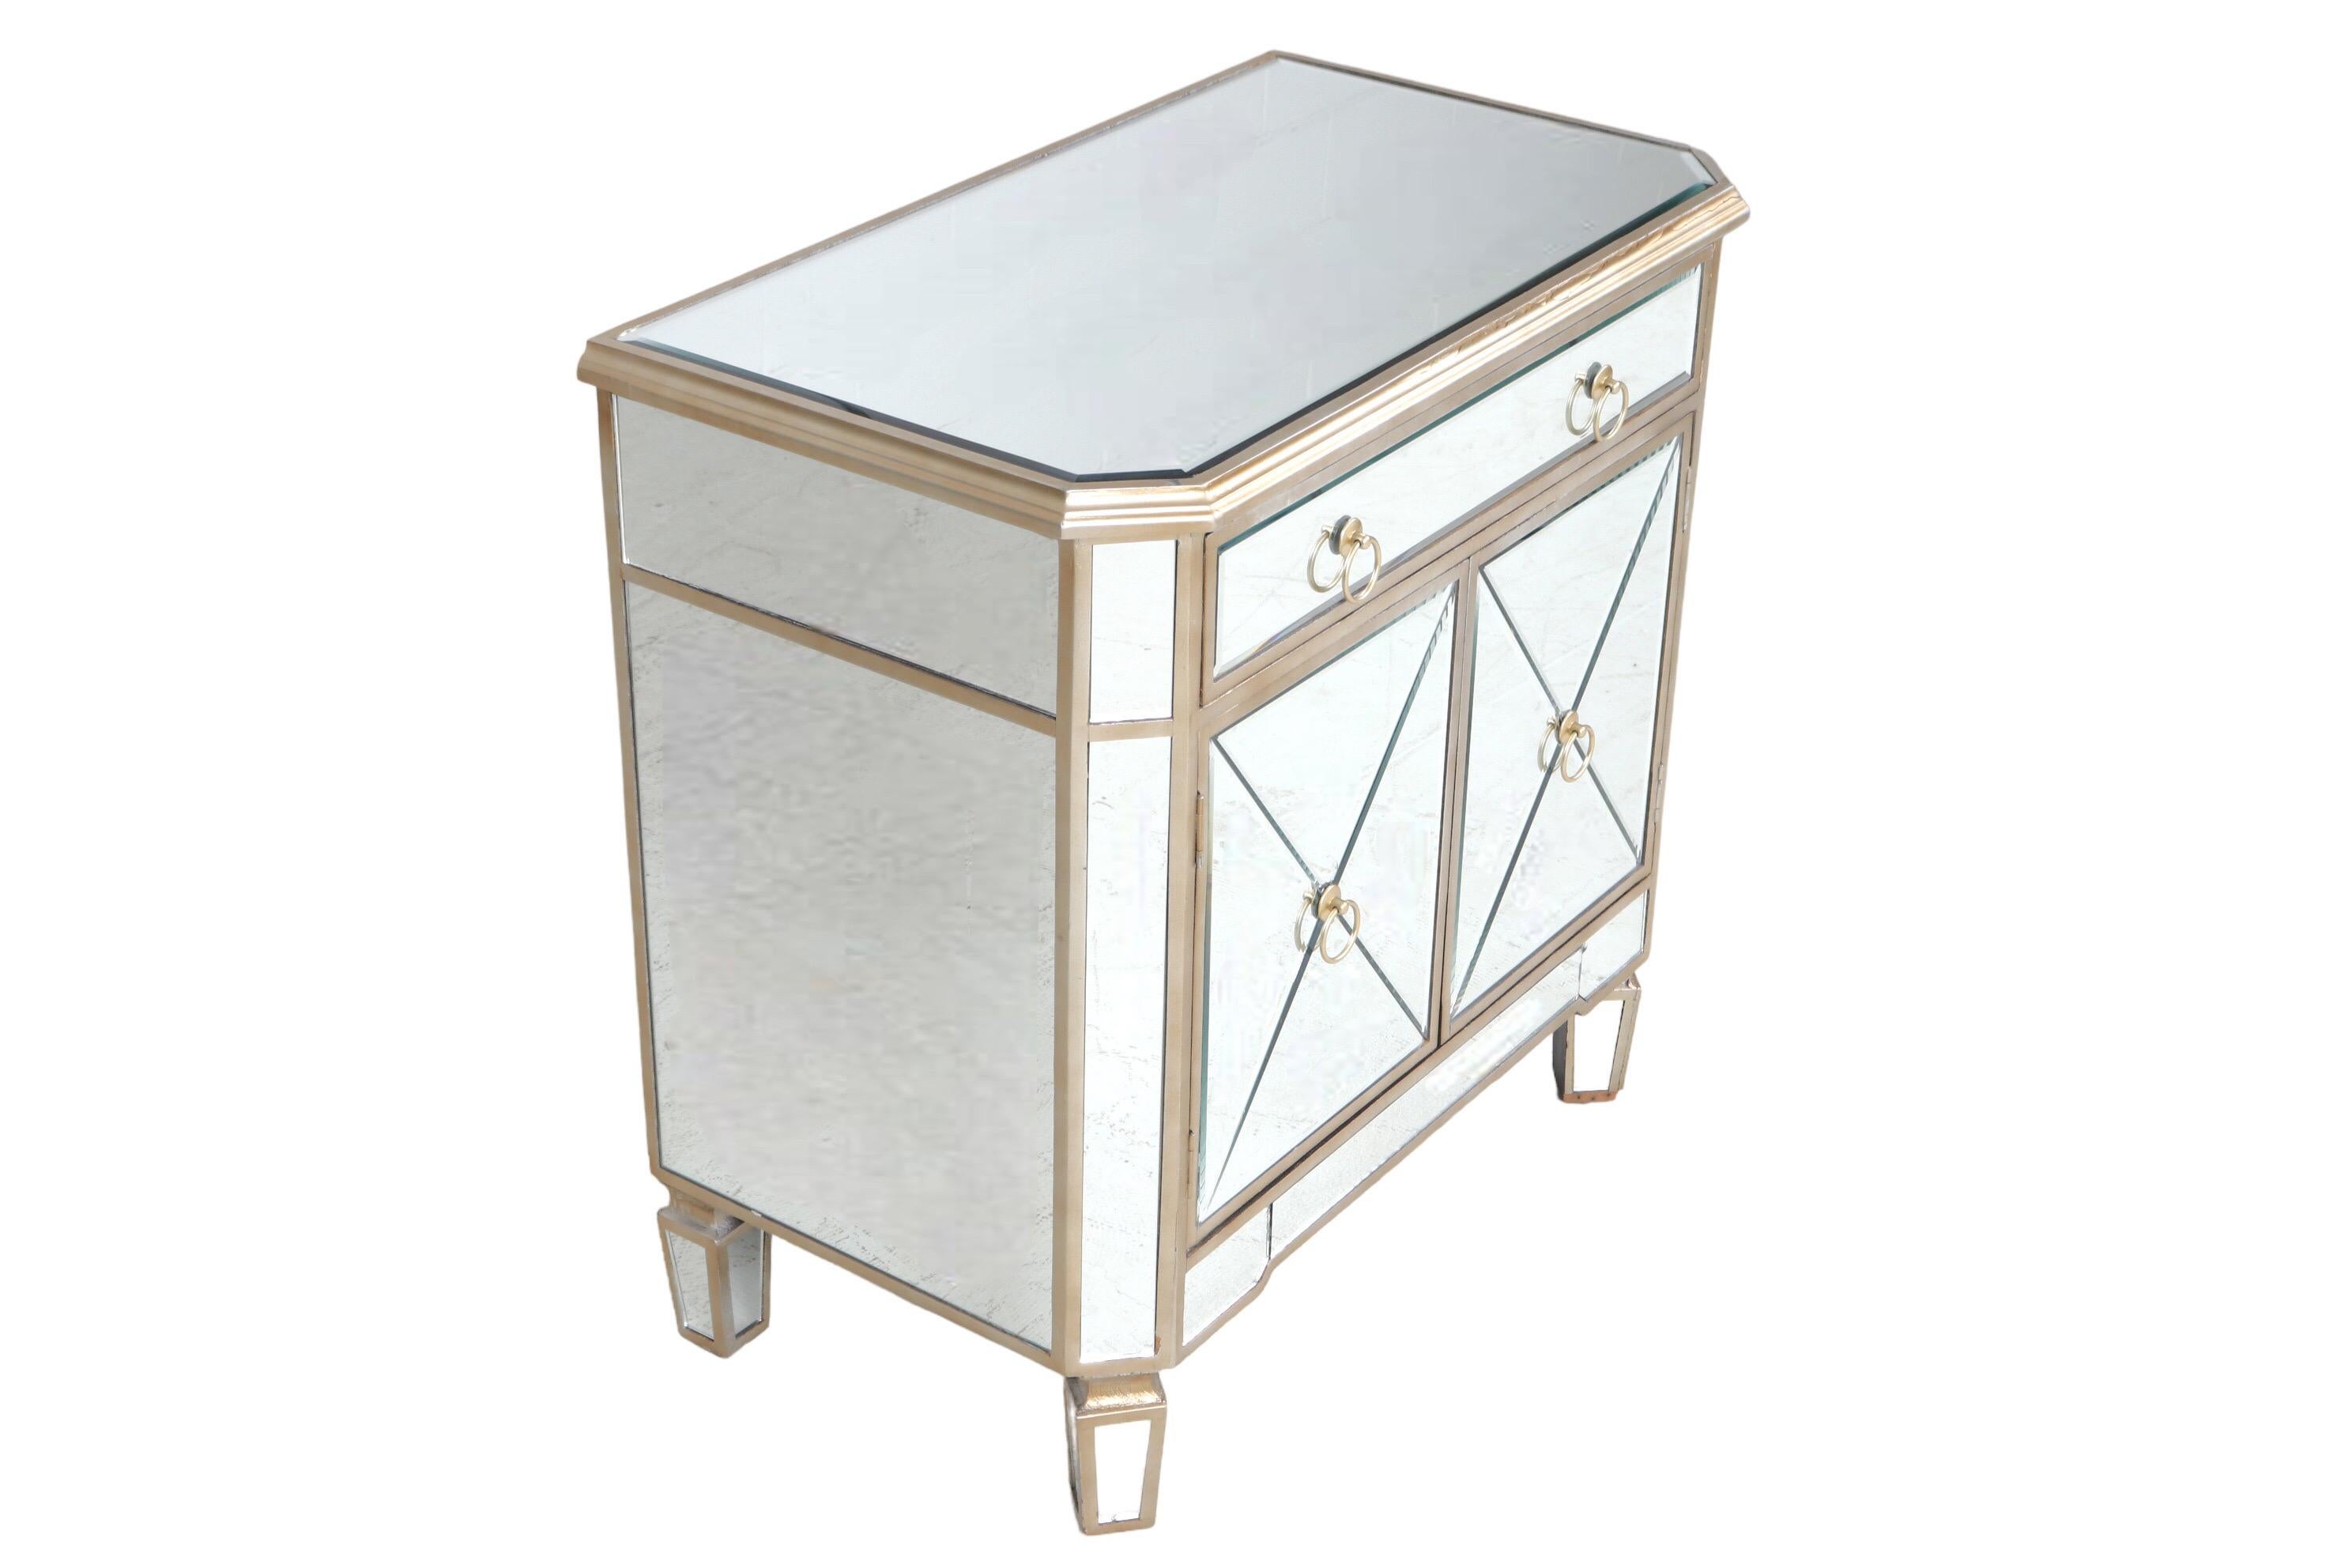 A Hollywood Regency style mirrored cabinet. Beveled mirrored glass panels cover each surface, framed with wood in a champagne finish. A single drawer and two cabinet doors below open with round loop handles. Stands on mirrored square tapered legs.